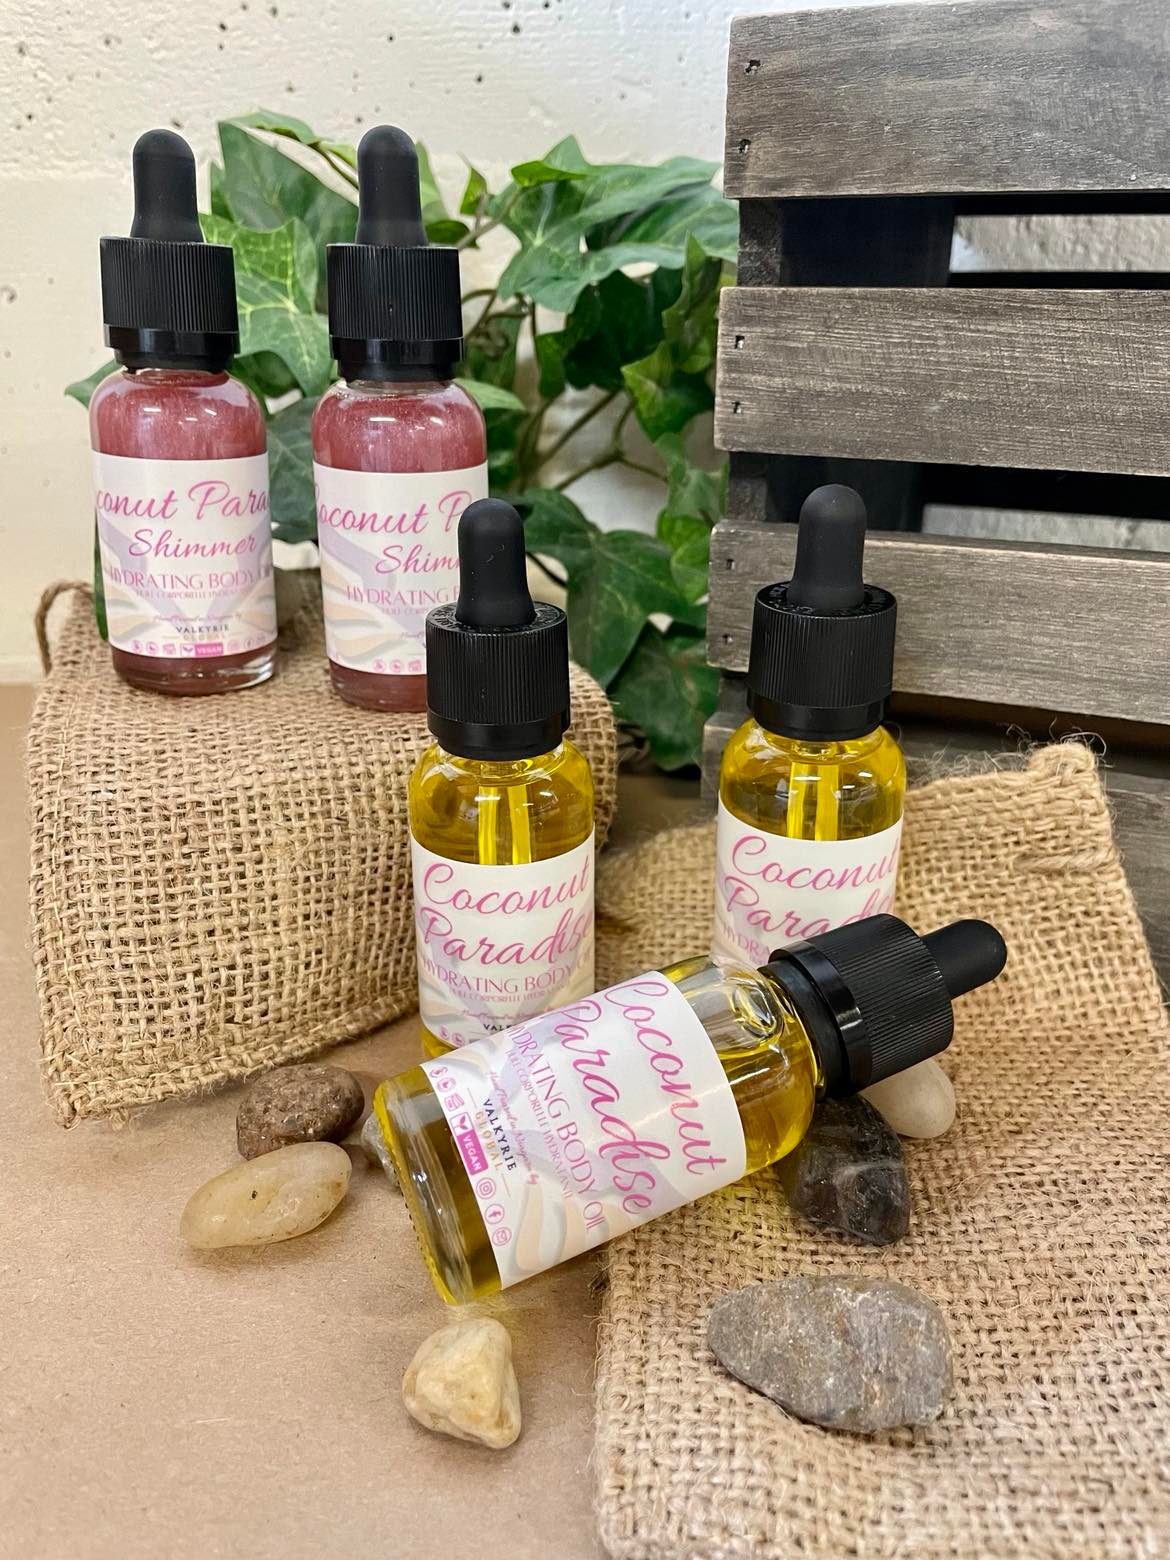 Coconut Paradise Hydrating Body Oil Valkyrie Global Skin Care Self Care Beauty St. Catharines Ontario Canada